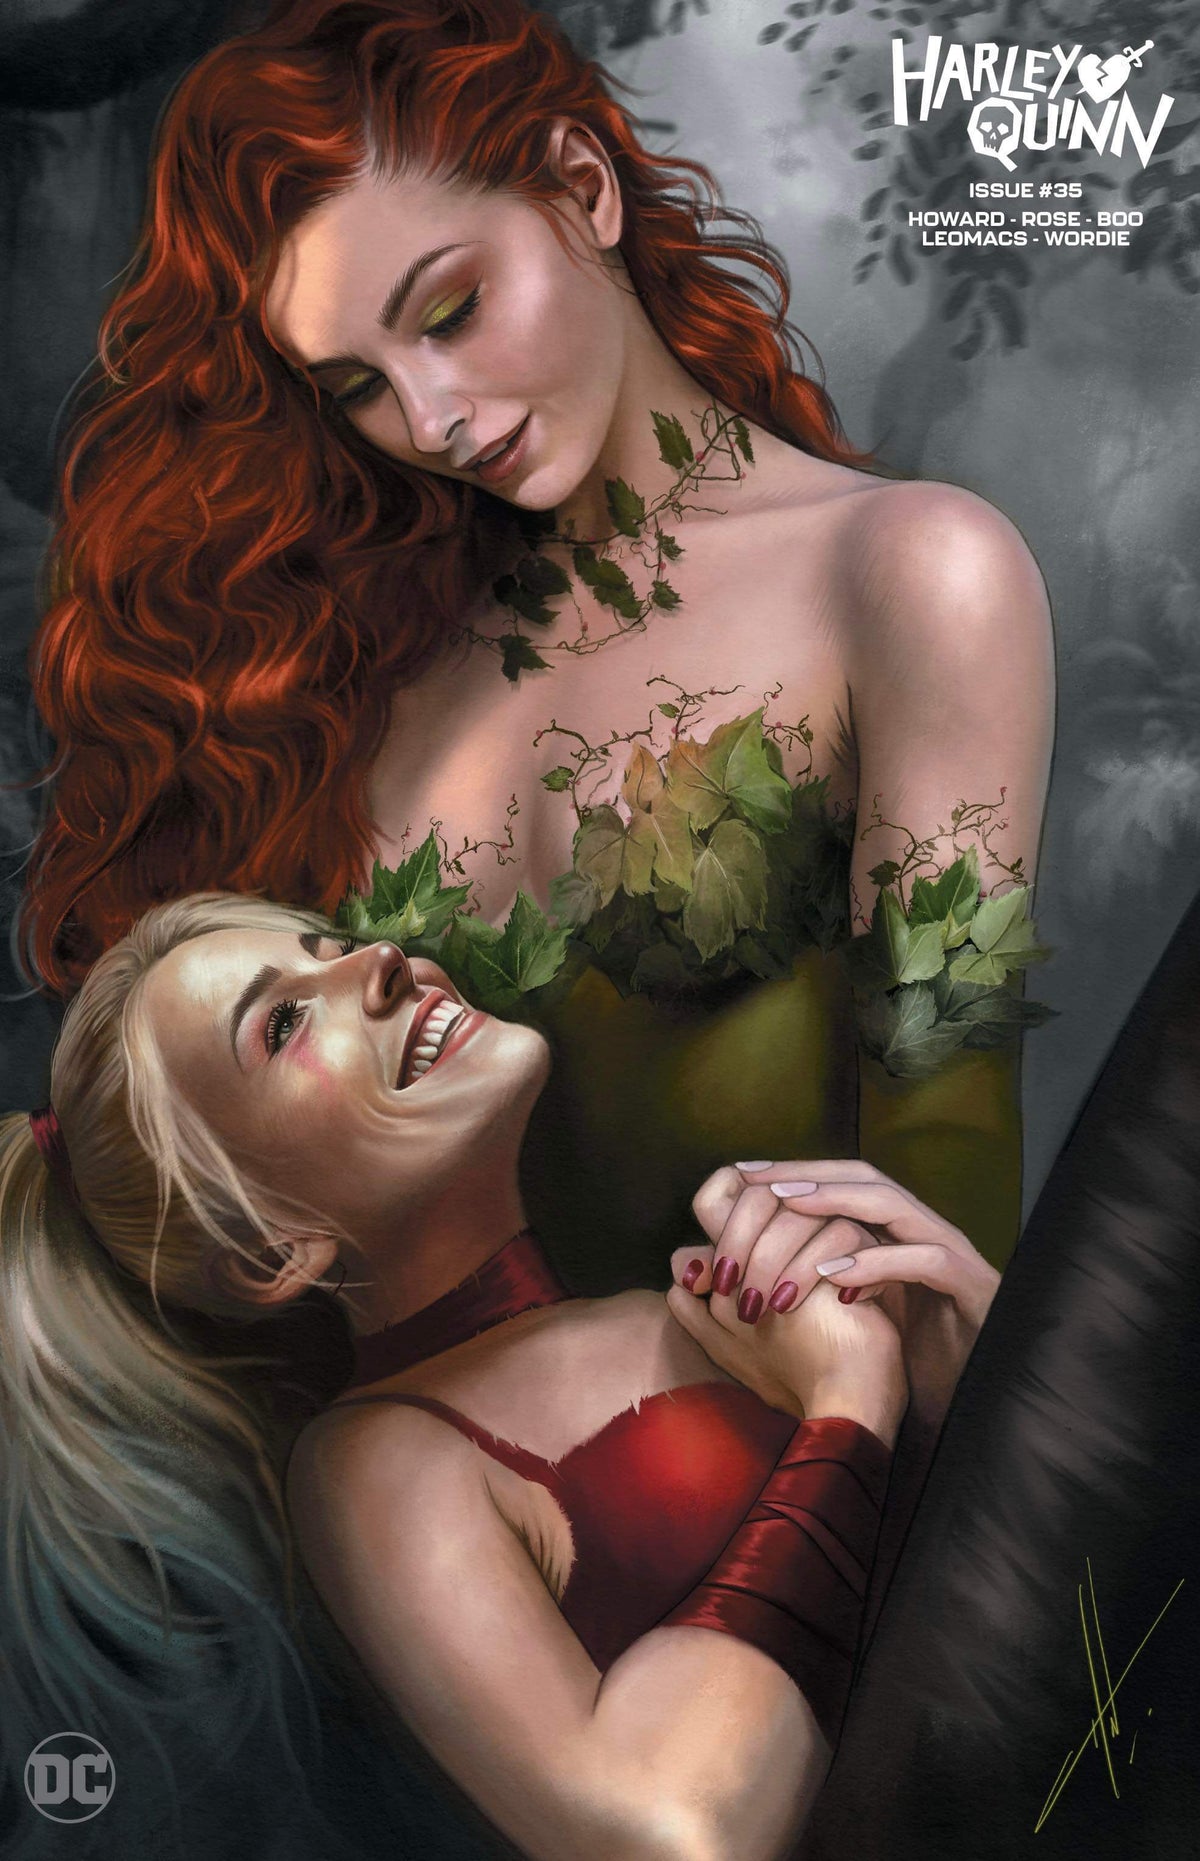 HARLEY QUINN #35 - EXCLUSIVE - POISON IVY - CARLA COHEN - LIMITED 900